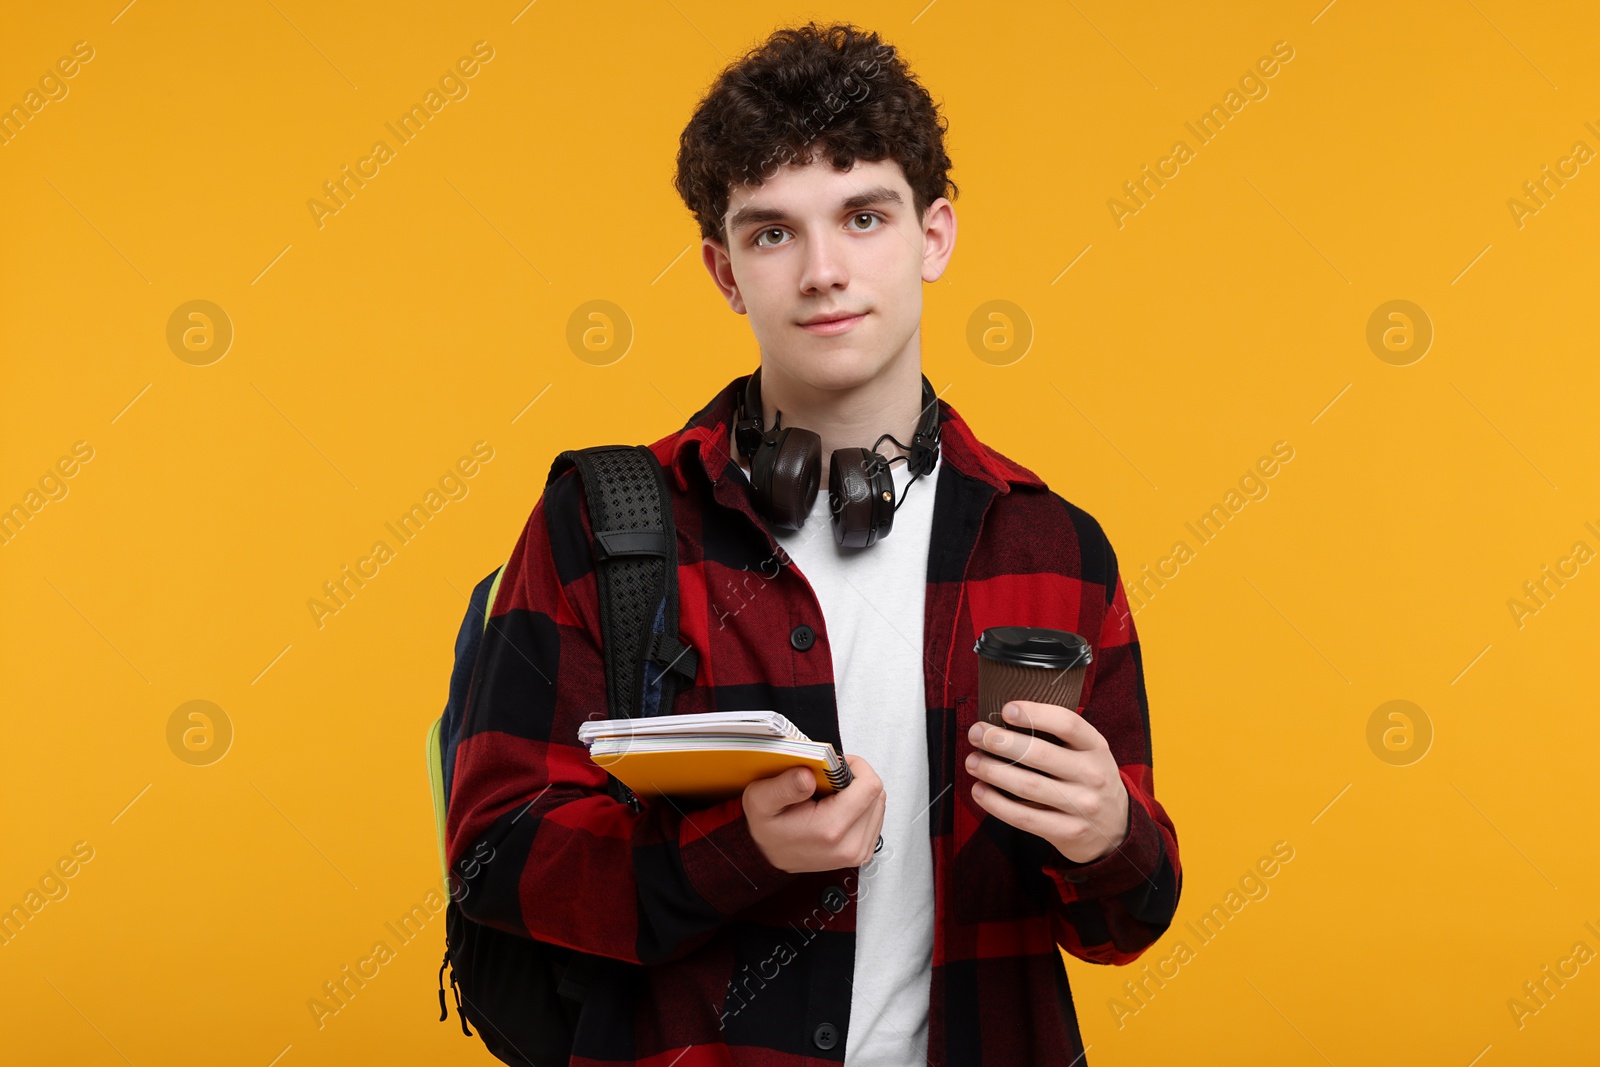 Photo of Portrait of student with backpack, headphones and notebooks on orange background